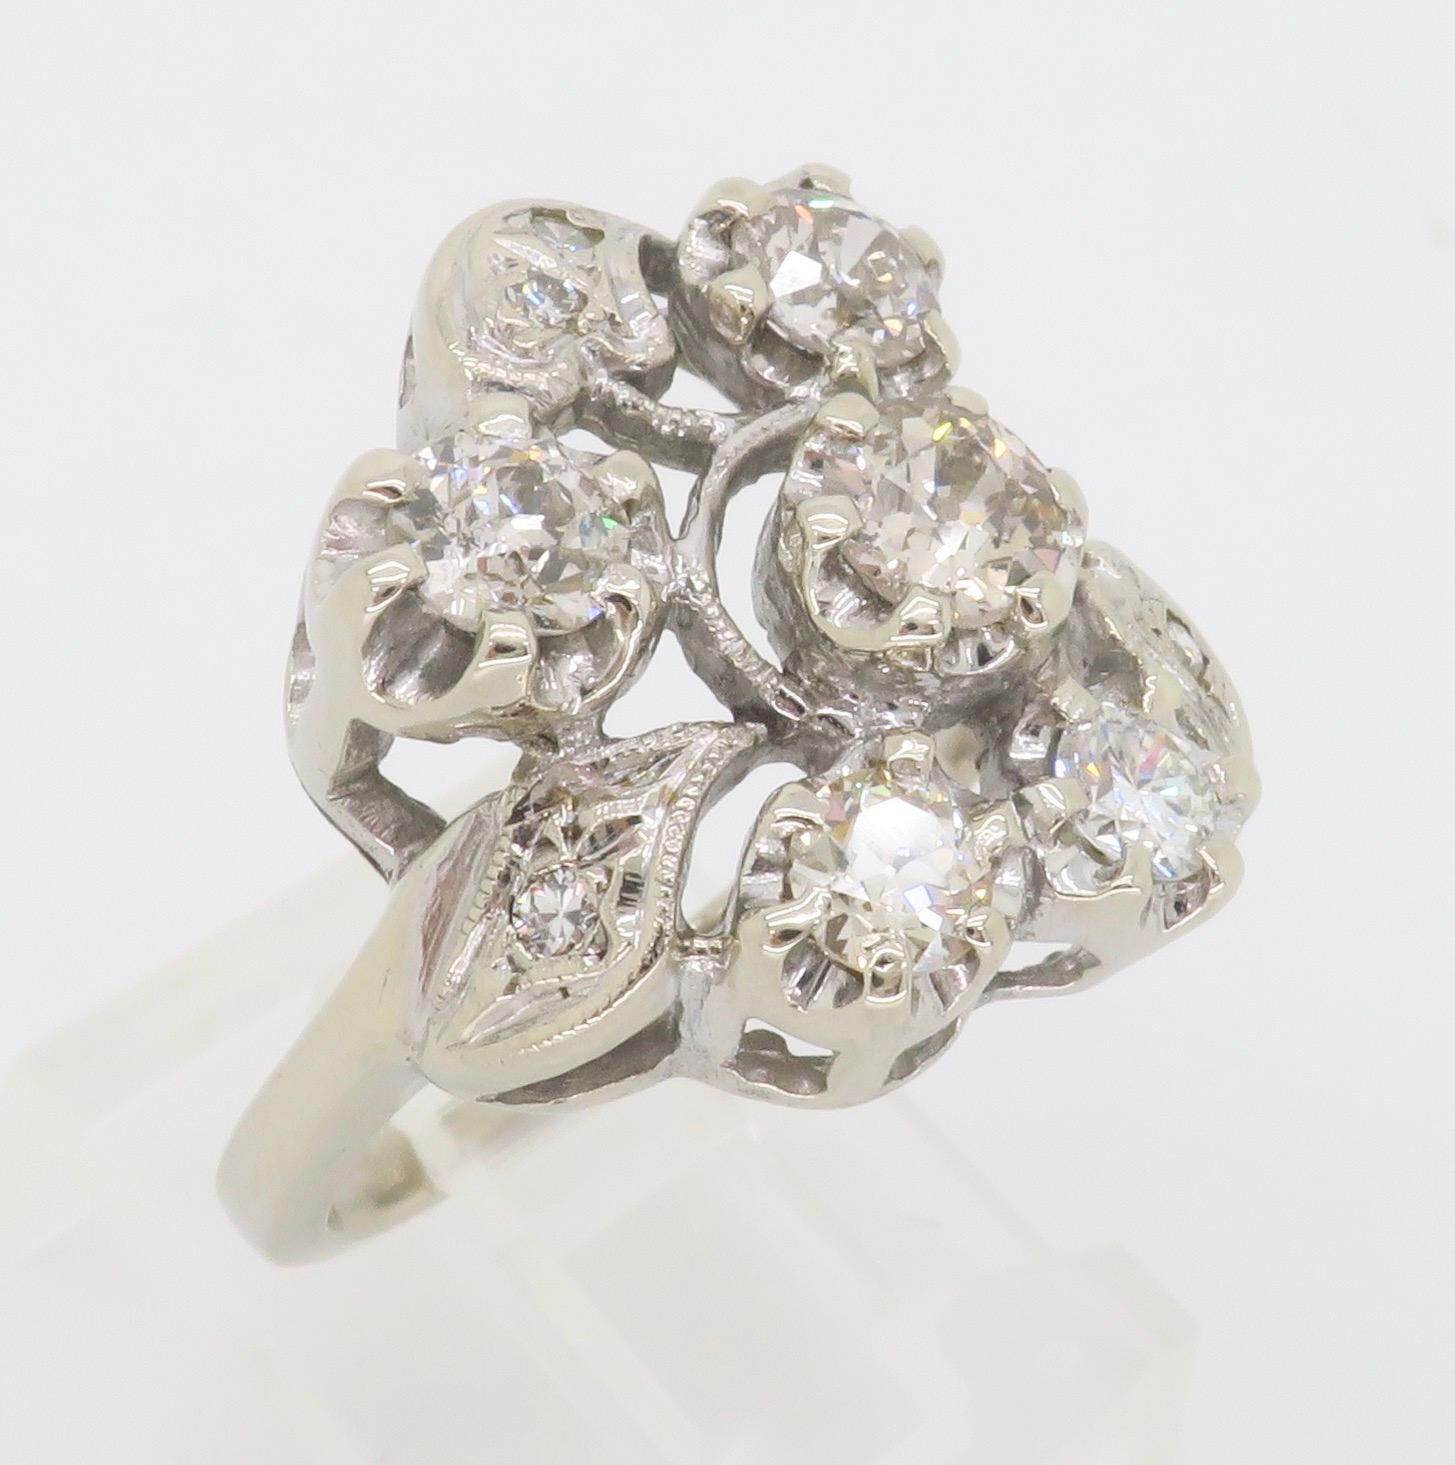 Vintage diamond cocktail ring with 1.00ctw of diamonds set into a beautiful design.

Diamond Carat Weight: Approximately 1.00CT
Diamond Cut: Old European Cut
Diamond Color: Average I-K
Diamond Clarity: Average SI2-I1
Metal: 14k White Gold
Stamped: